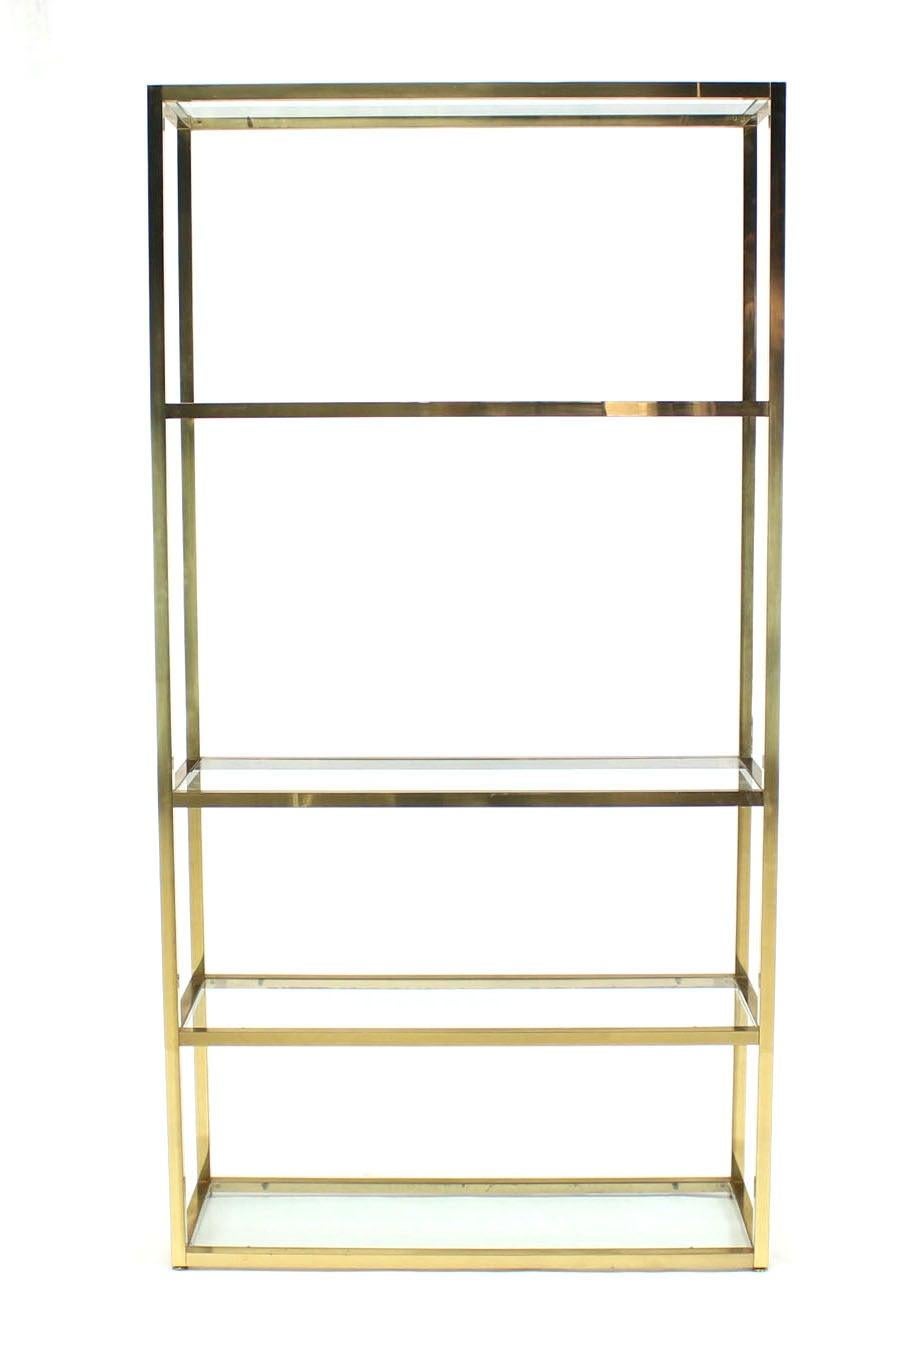 Solid Square Brass Tube Five Glass Shelves Etagere Display Fixture Vitrine In Good Condition For Sale In Rockaway, NJ